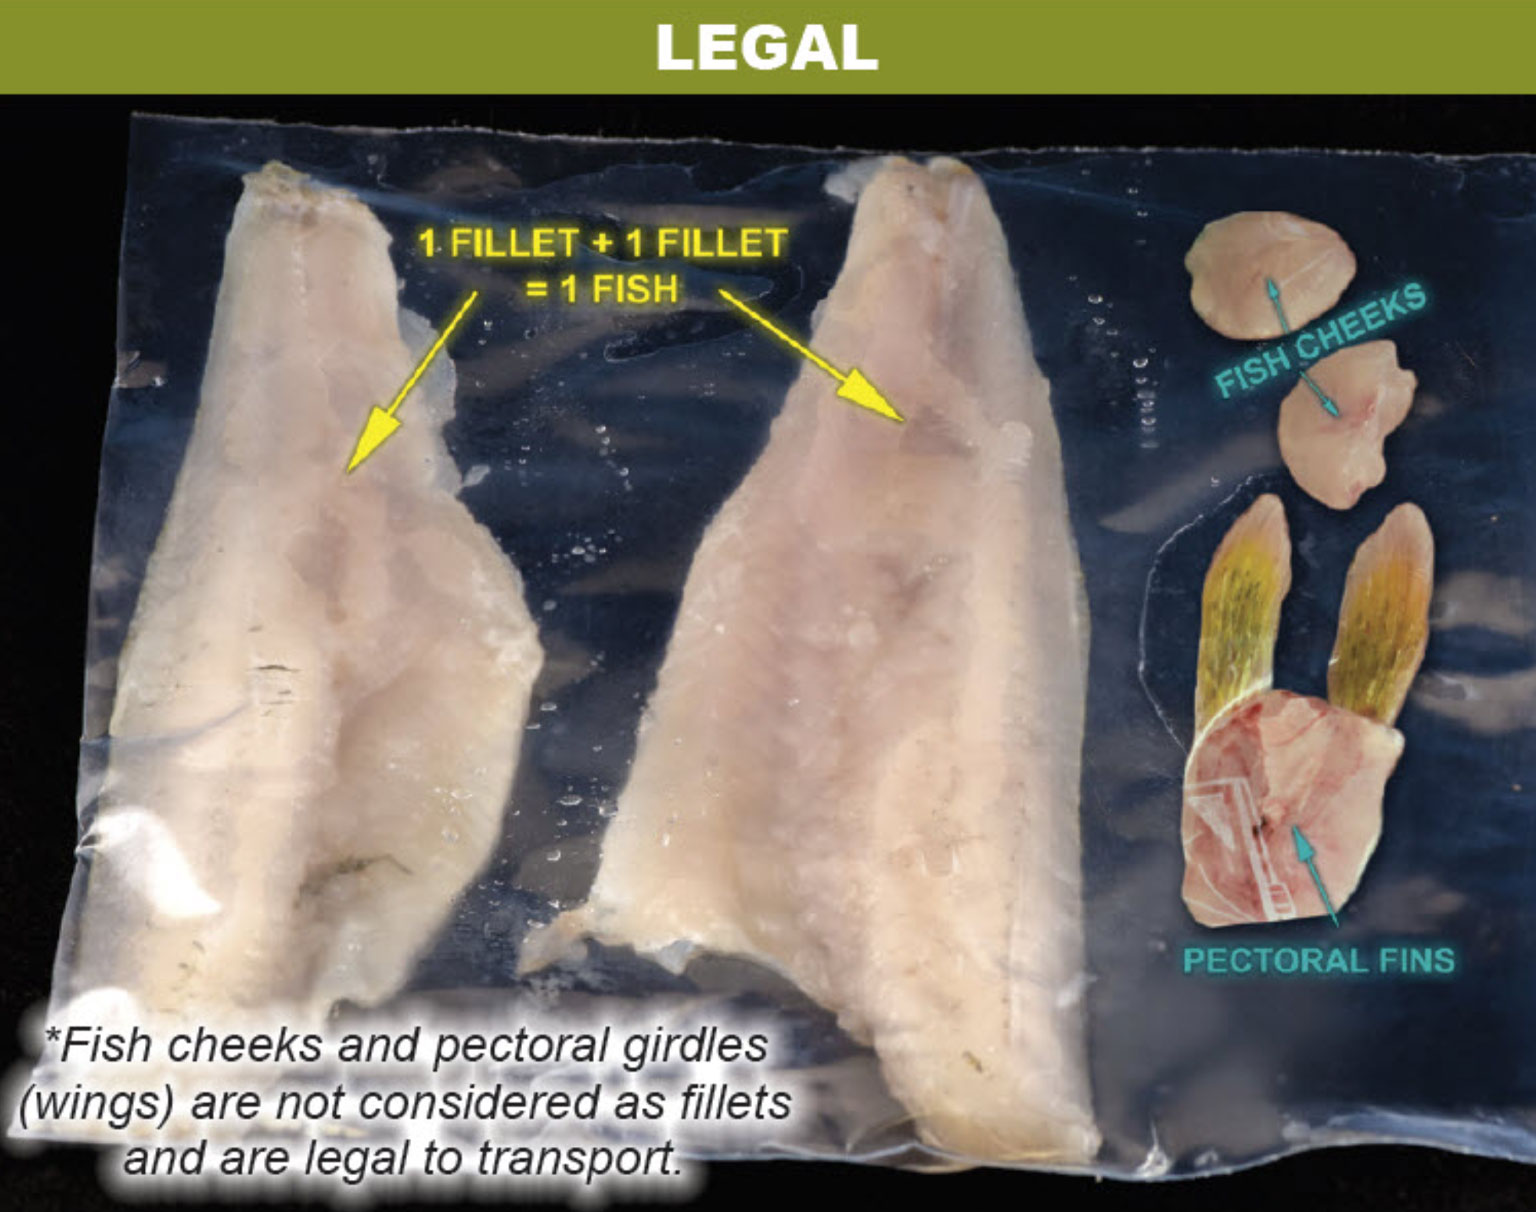 Separated fillets in a package